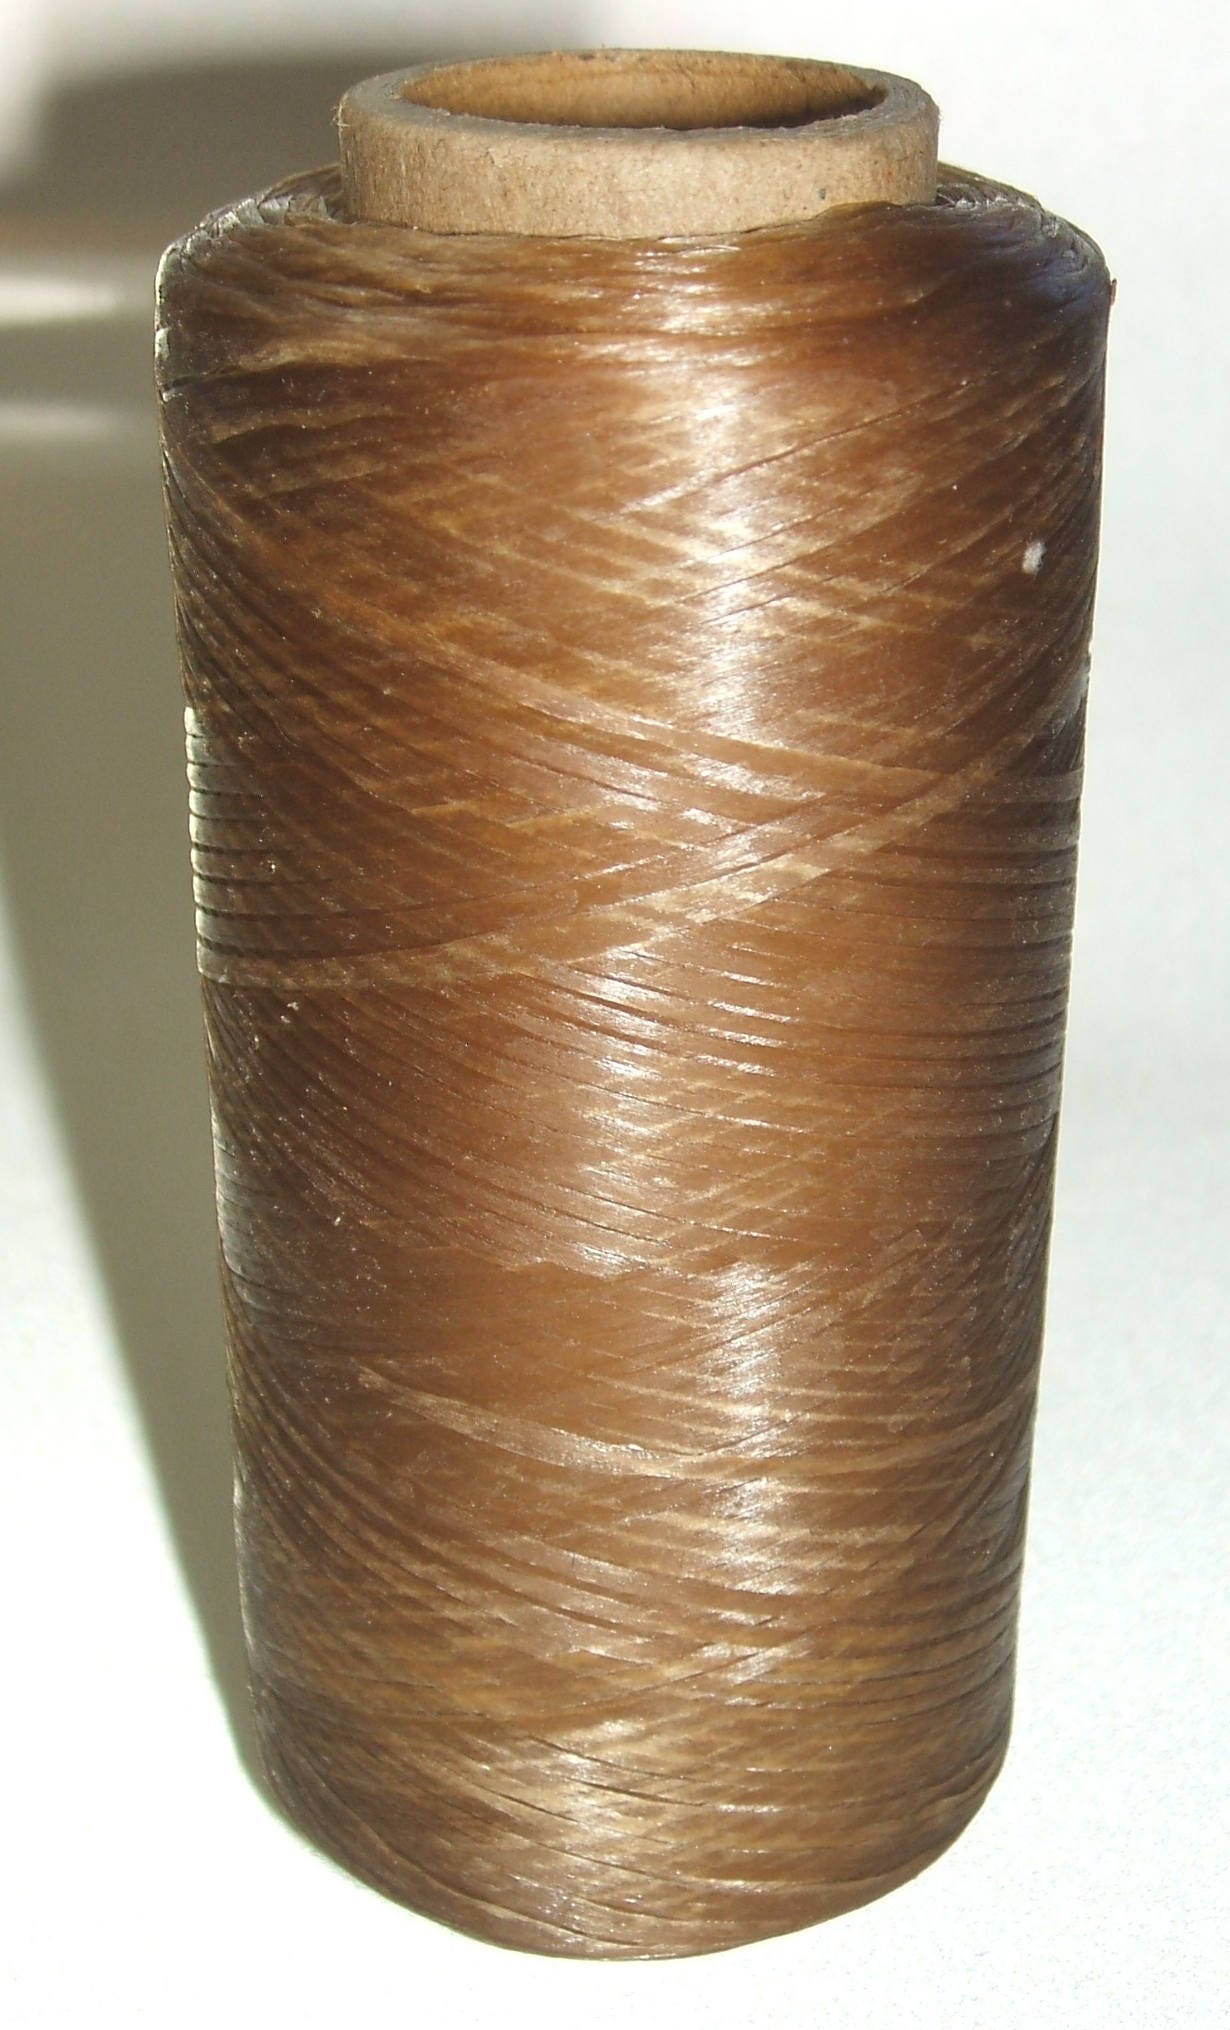 Natural Artificial Sinew Thread by Make Market®